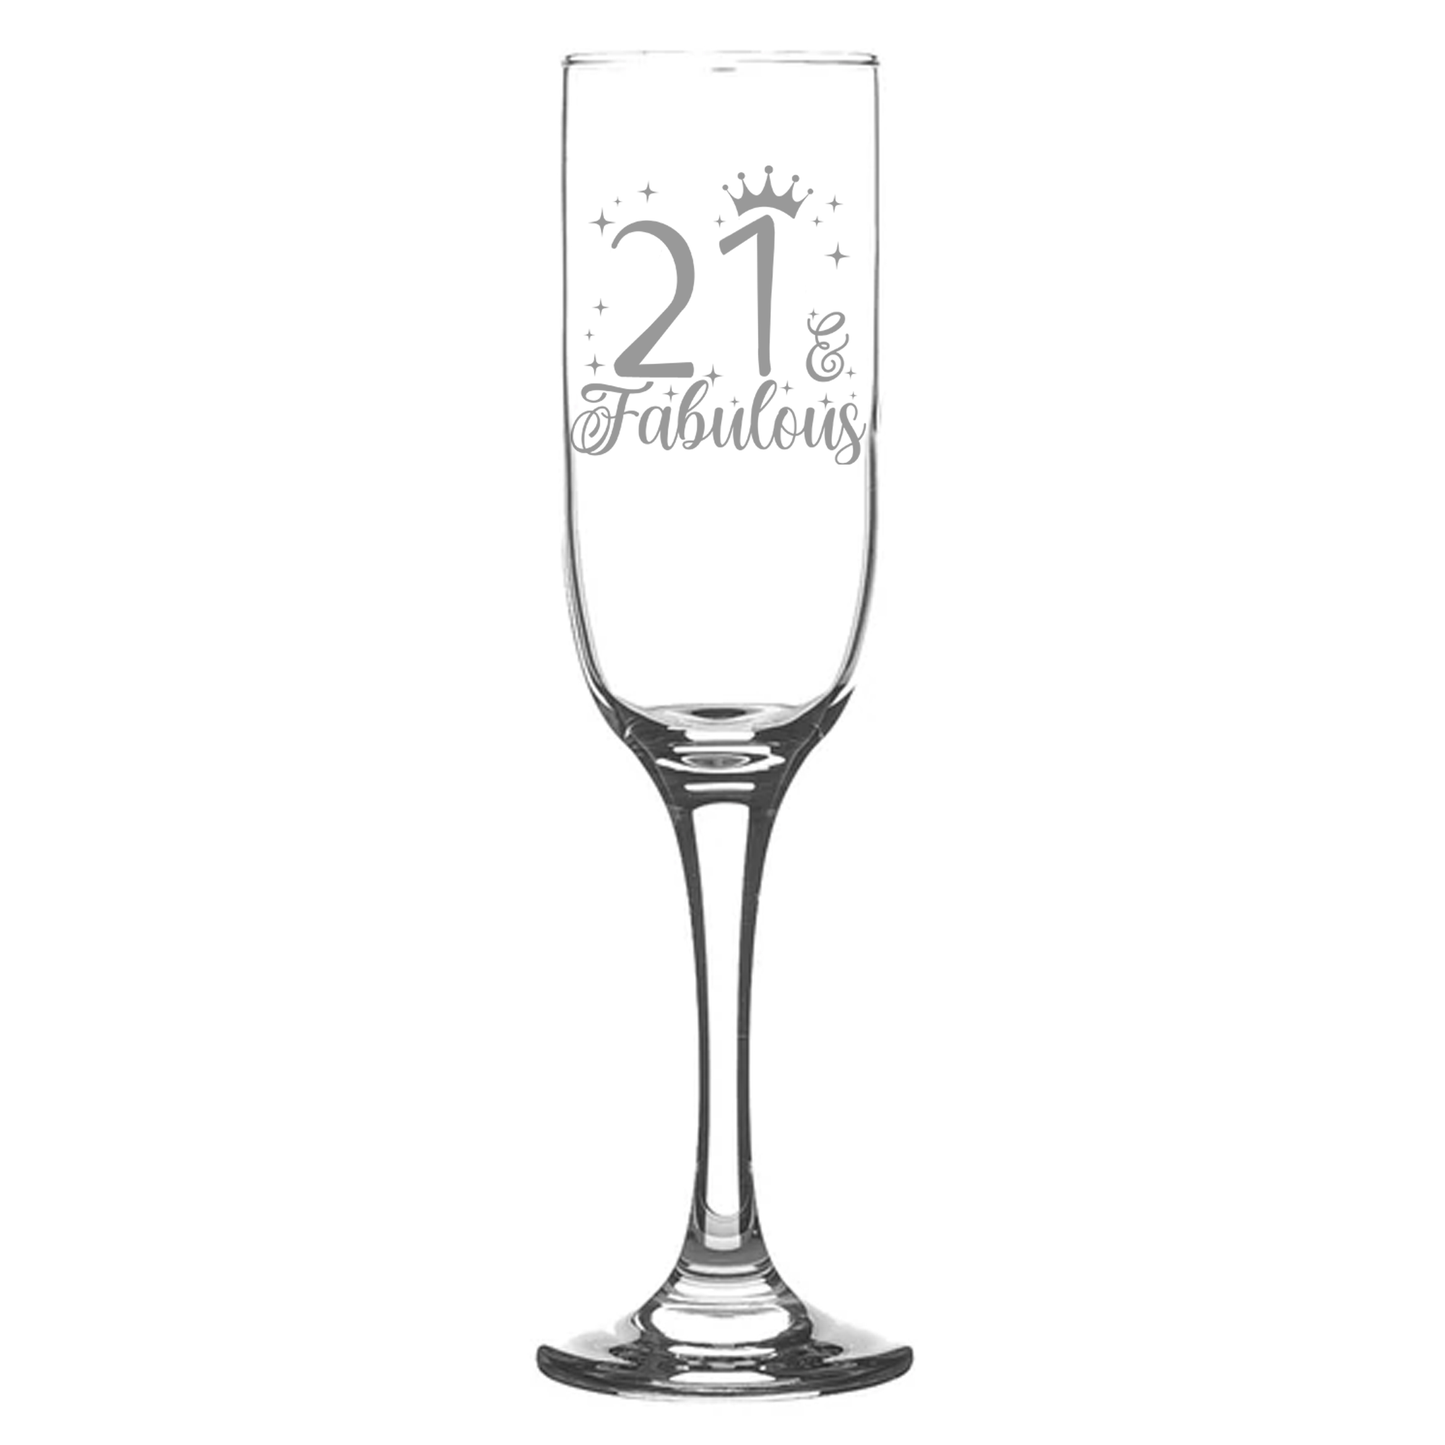 21 & Fabulous Engraved Champagne Glass and/or Coaster Set  - Always Looking Good - Champagne Glass On Its Own  